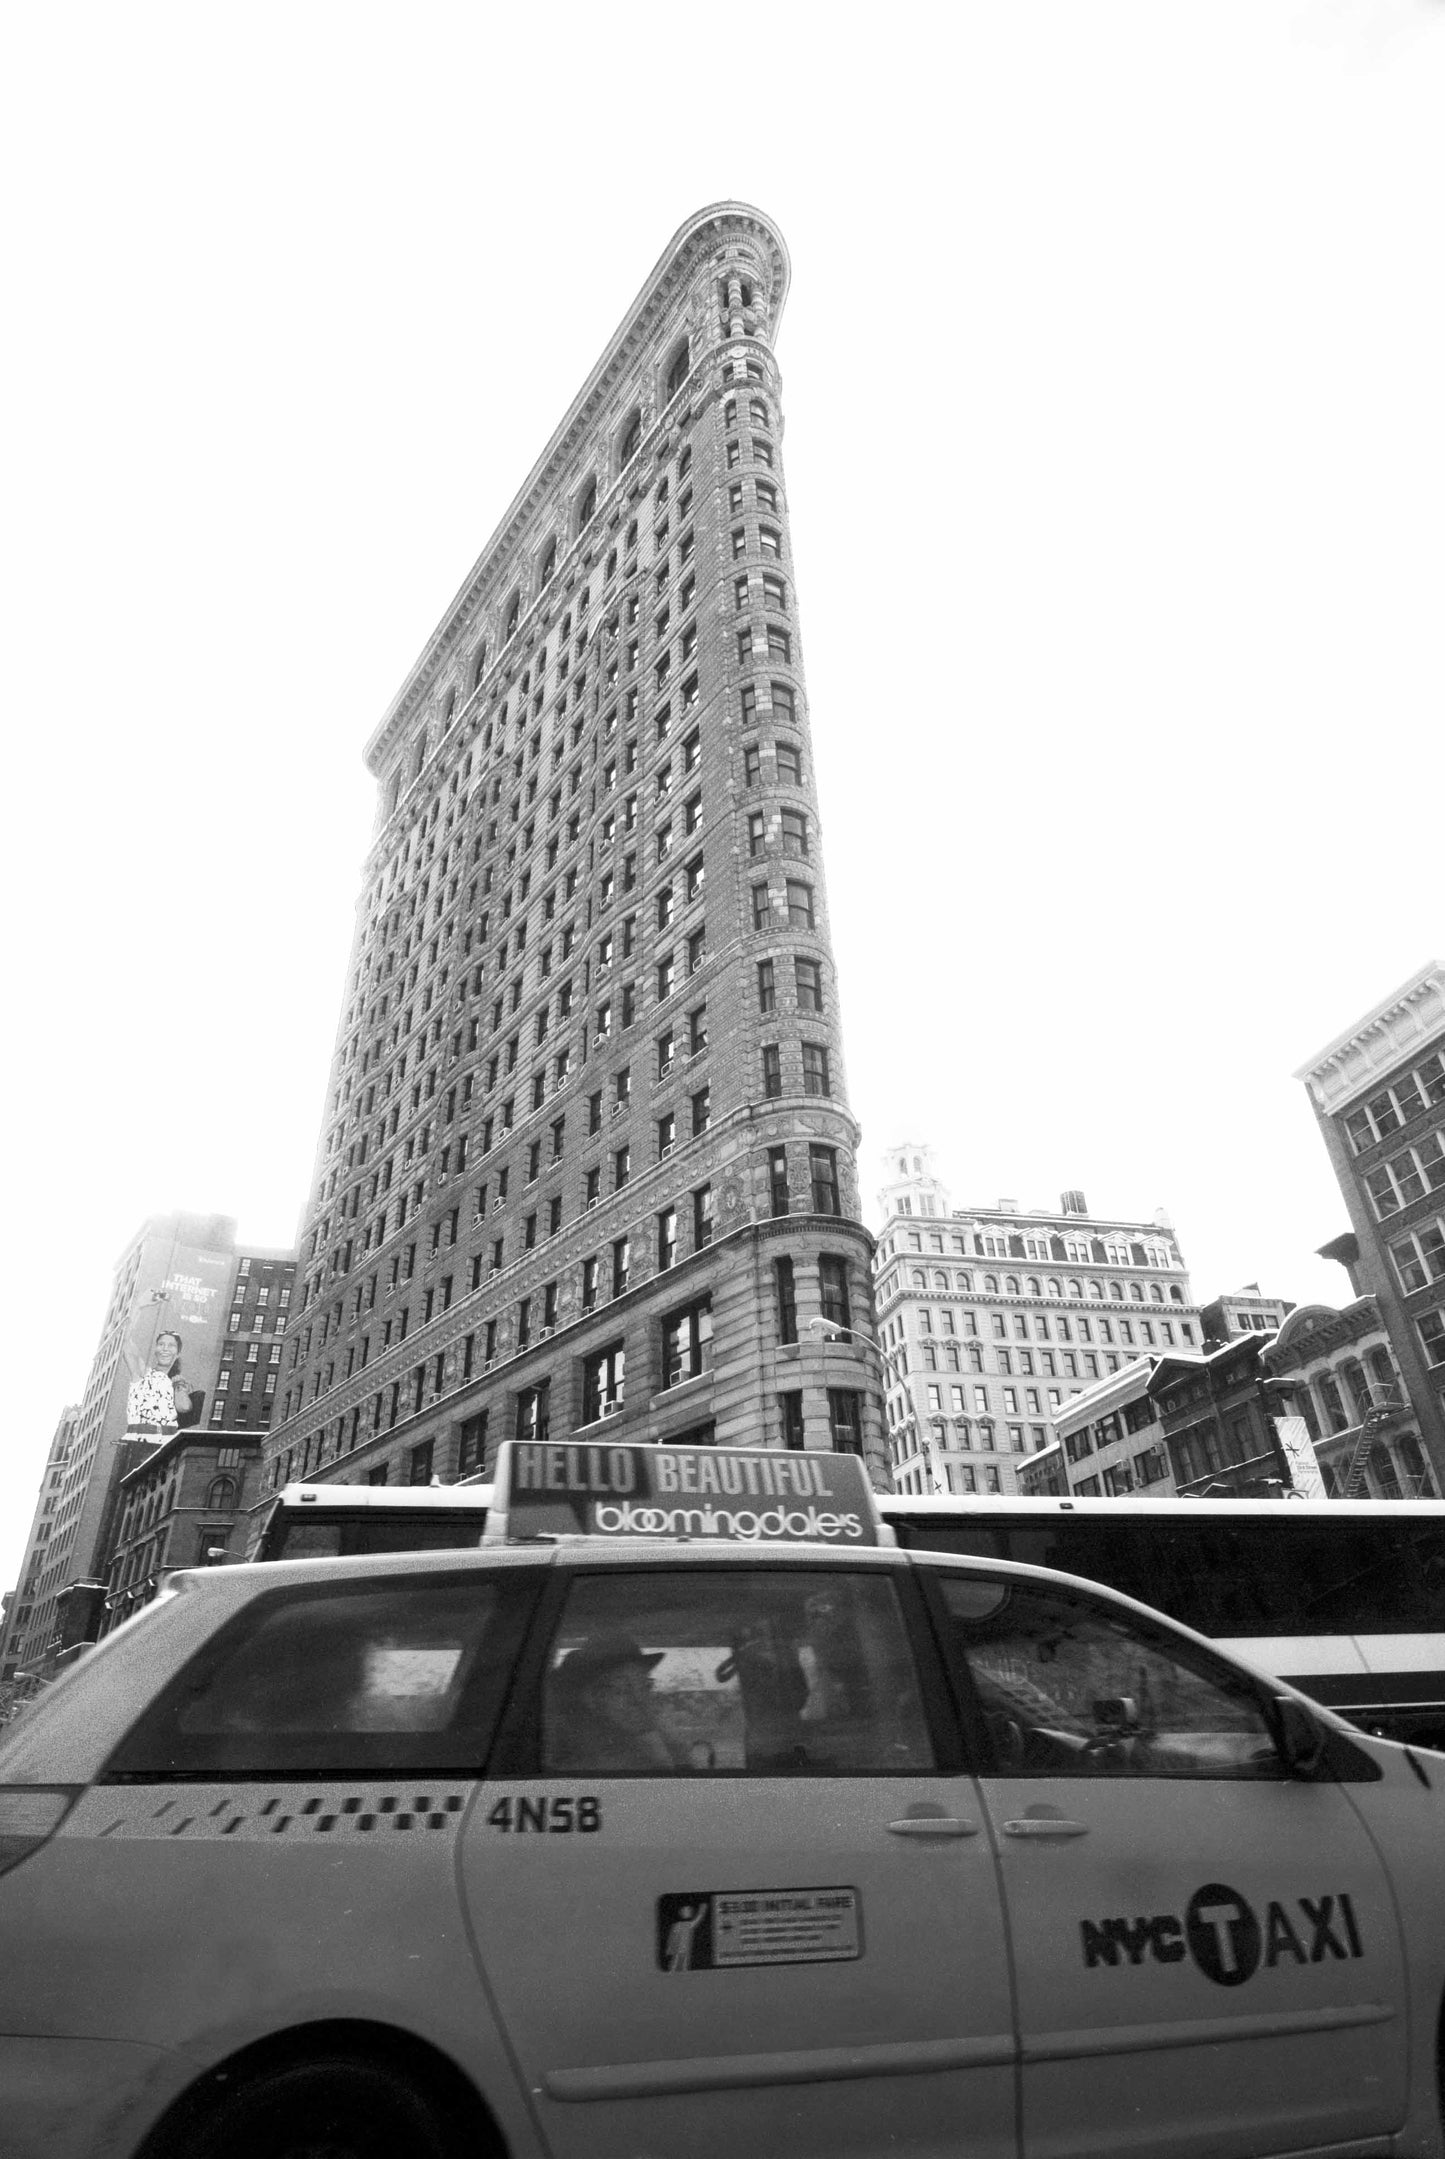 The Flatiron Building on New Yorks 5th Avenue features in this busy street scene.